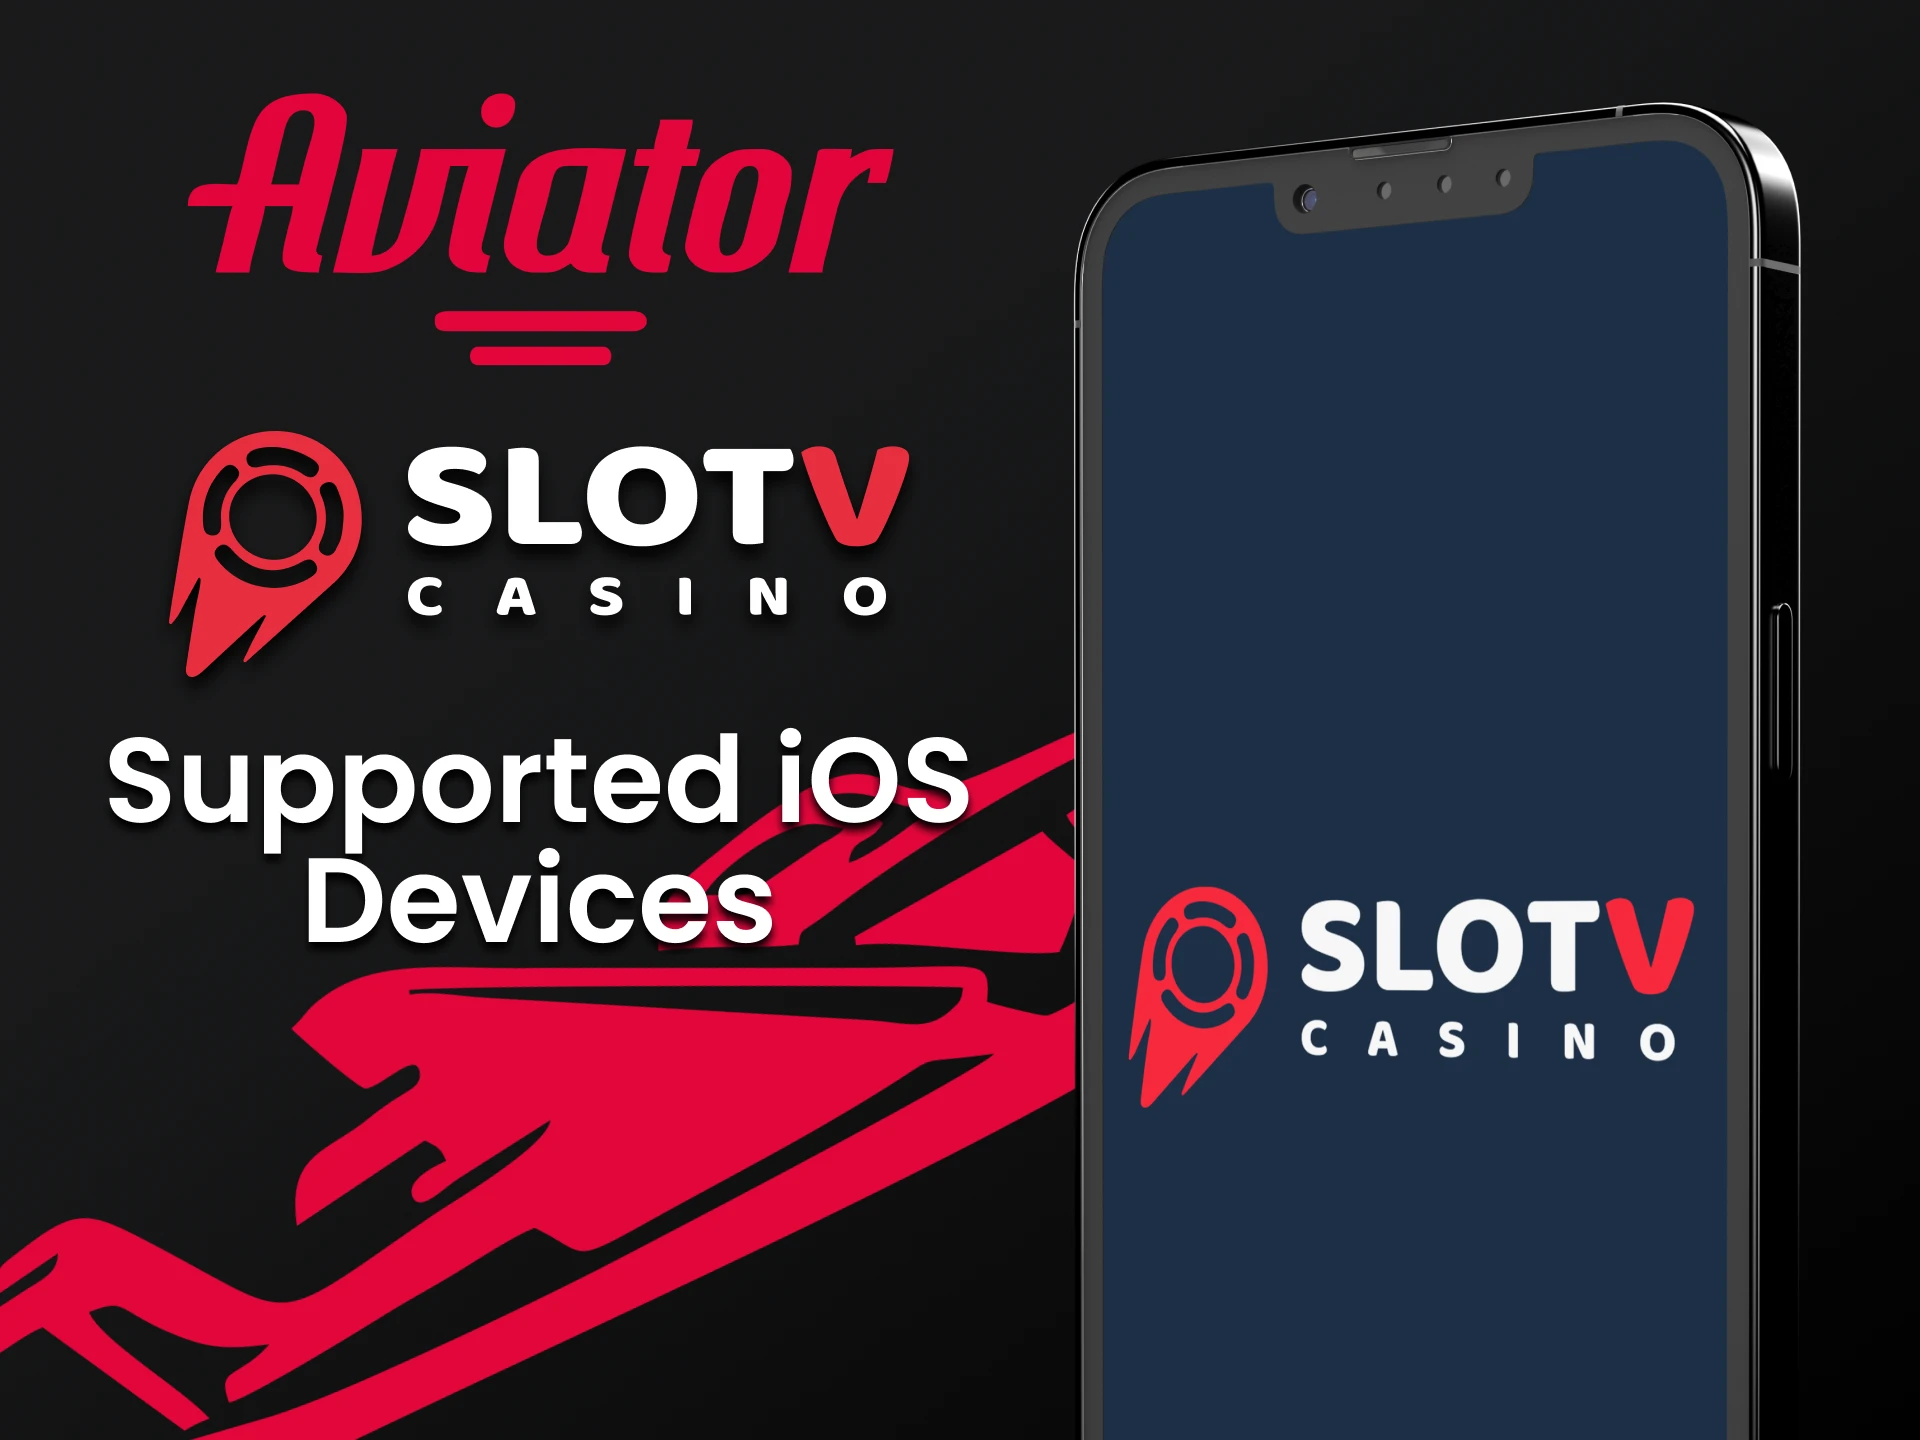 Download the SlotV iOS app to play Aviator.